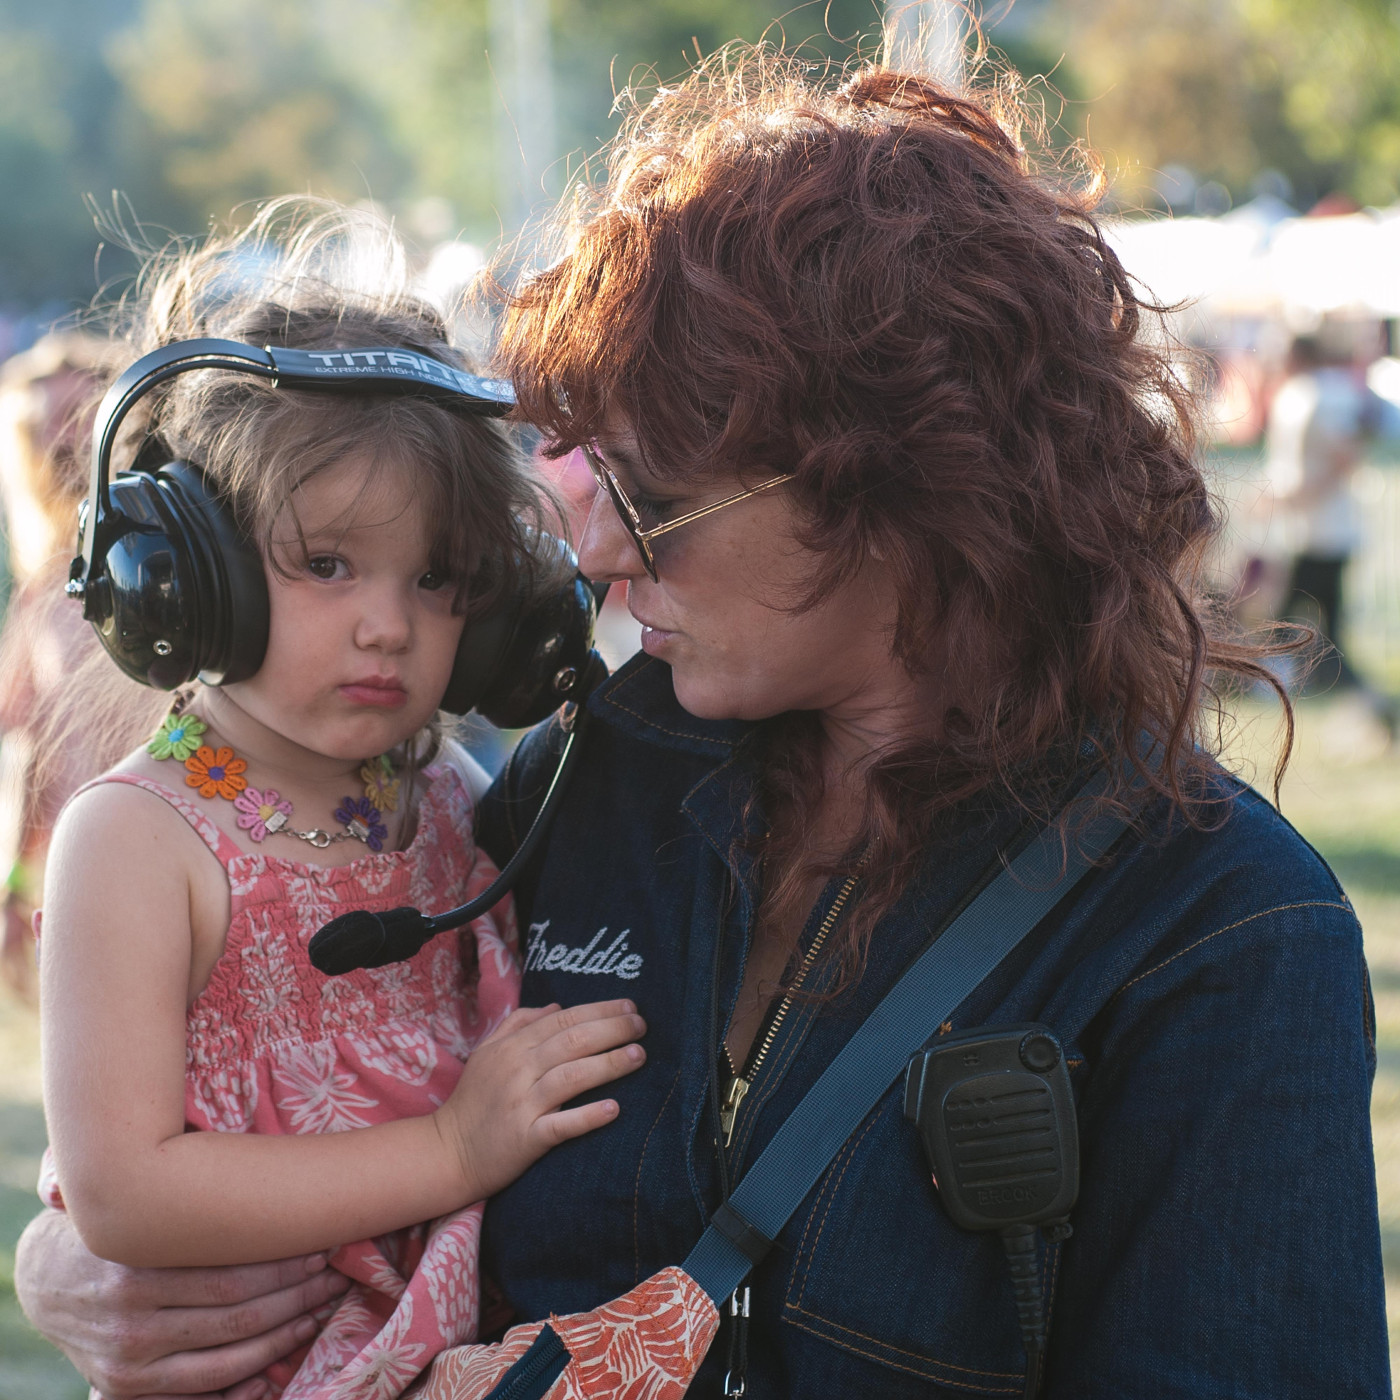 images/Desert Daze 2019/Julie Edwards spouse of Phil Pirrone with daughter watching pop perform DSC_8746